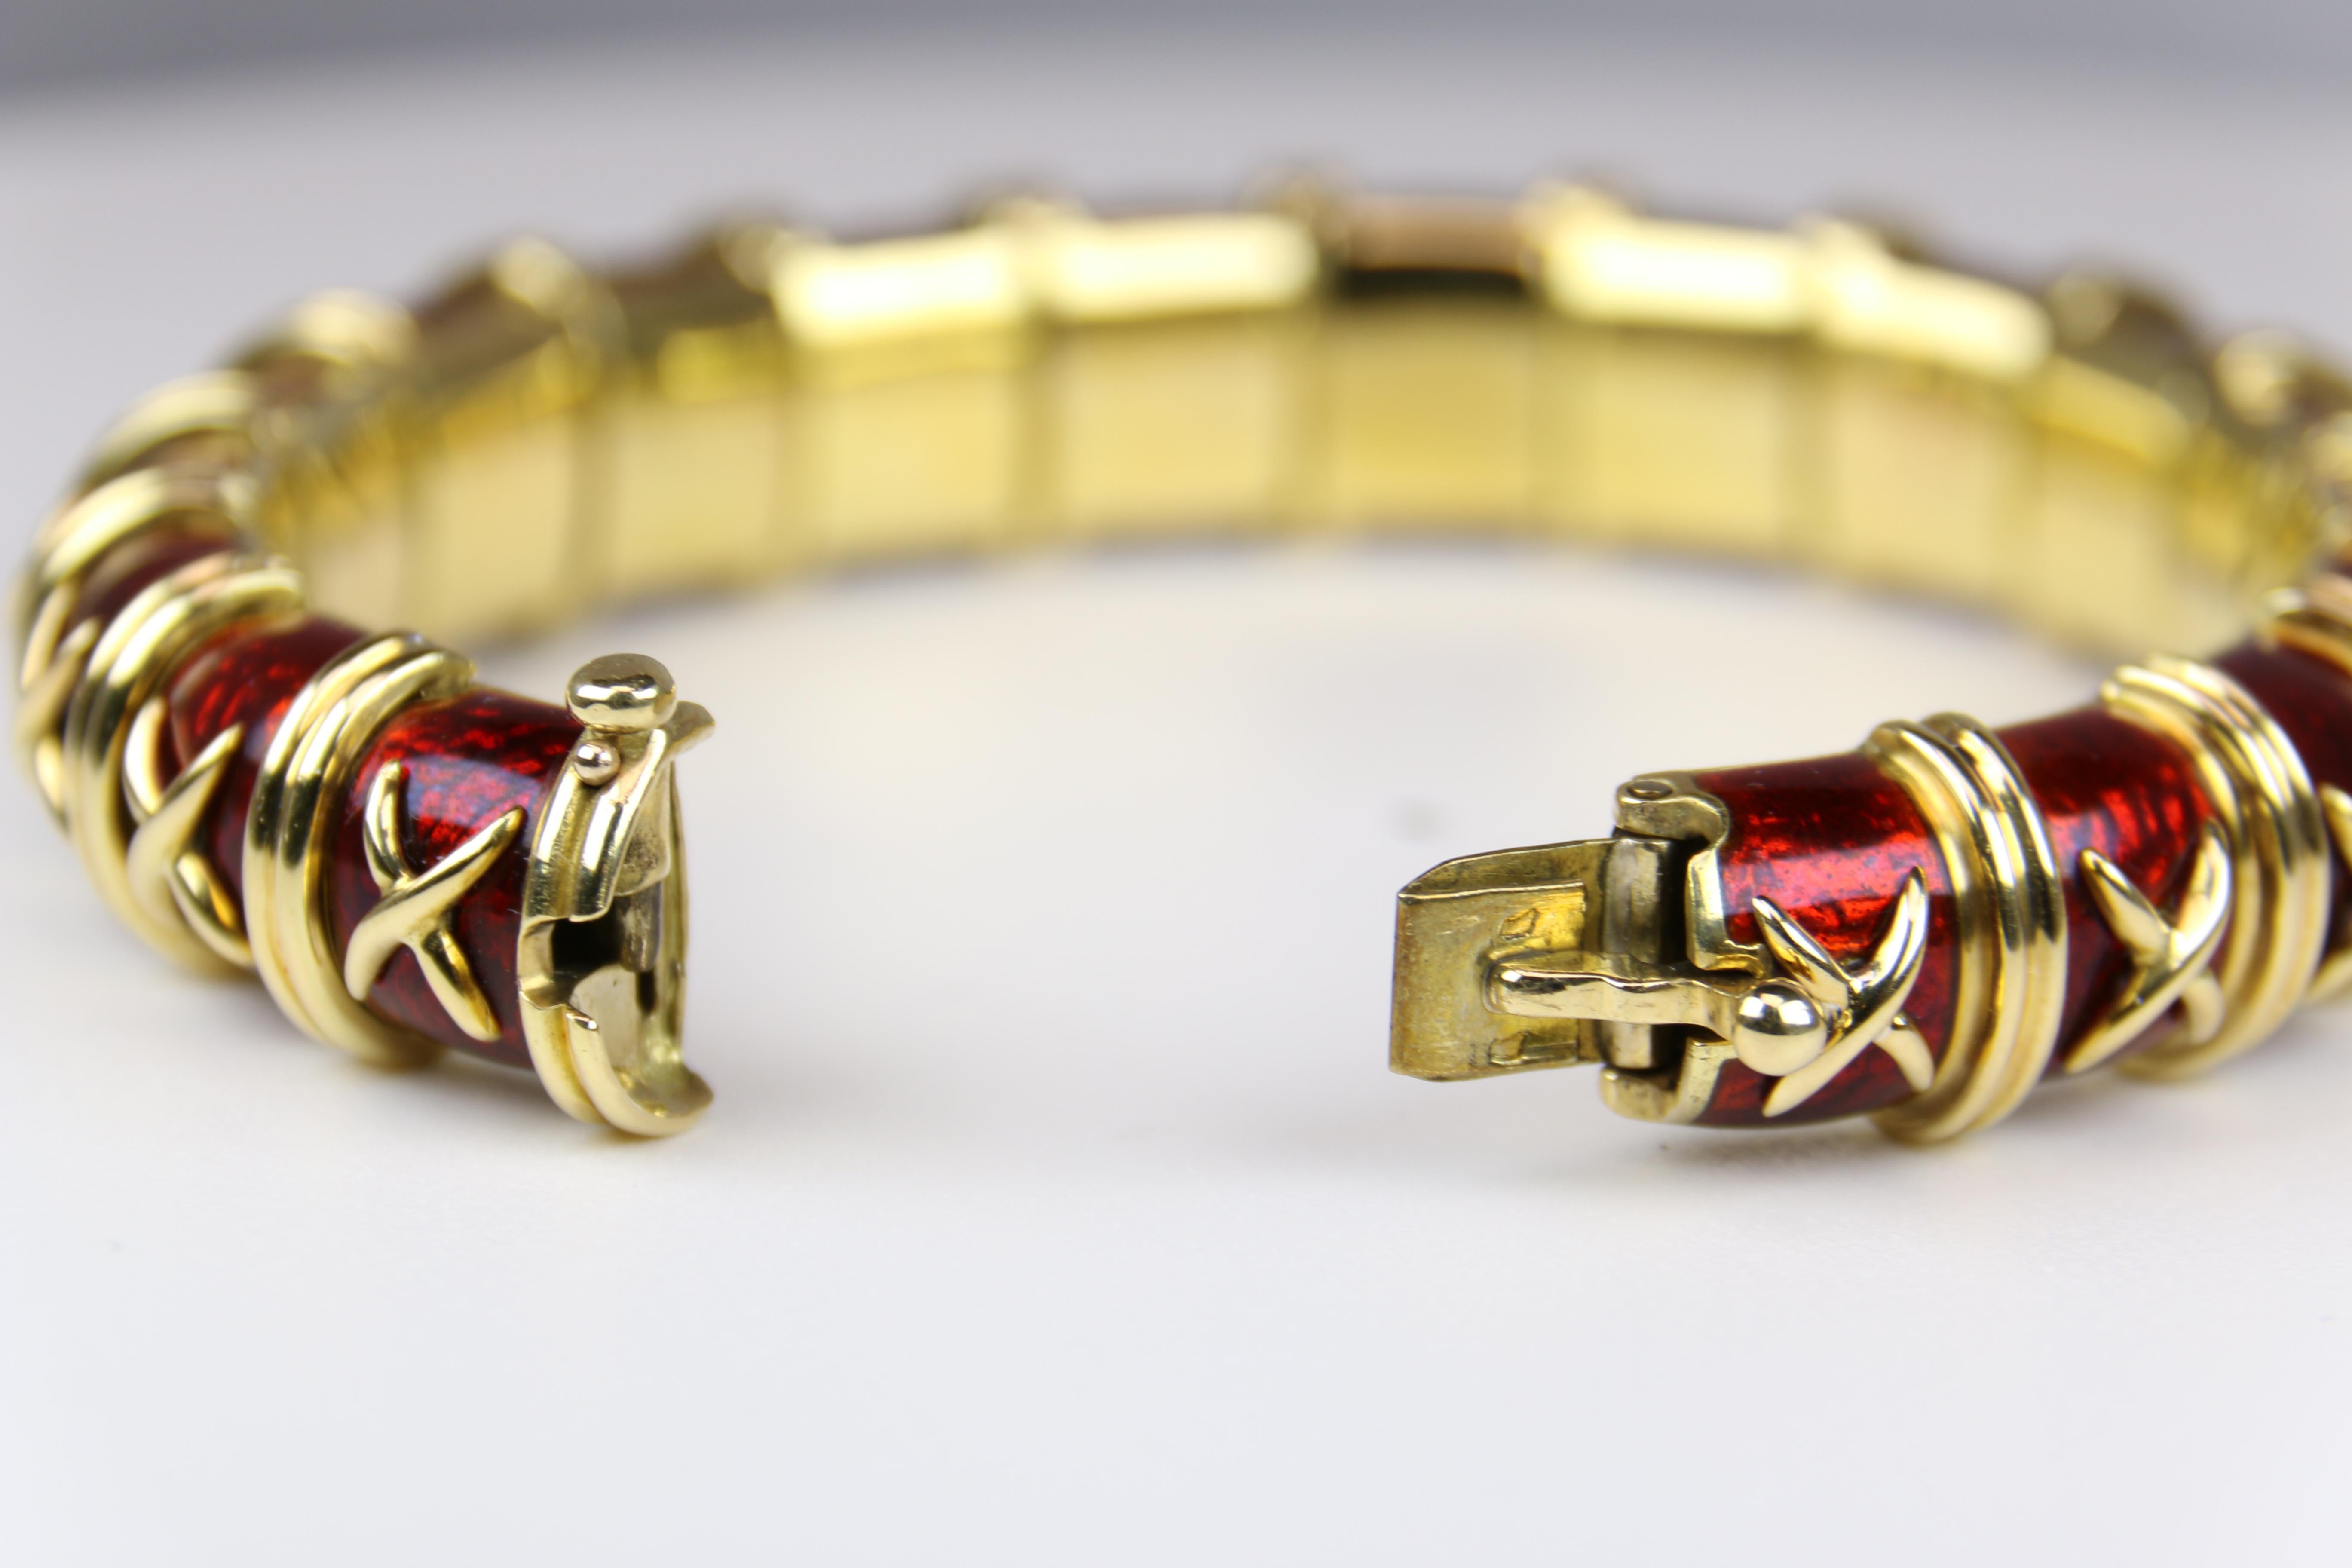  This gorgeous 18K Yellow gold Red Enamel Bracelet is a Classic in Schlumberger style. Sporting a Pin Safety Clasp in 18k yellow gold that is shadowed by classy and timeless red enamel, this piece is absolutely stunning.
